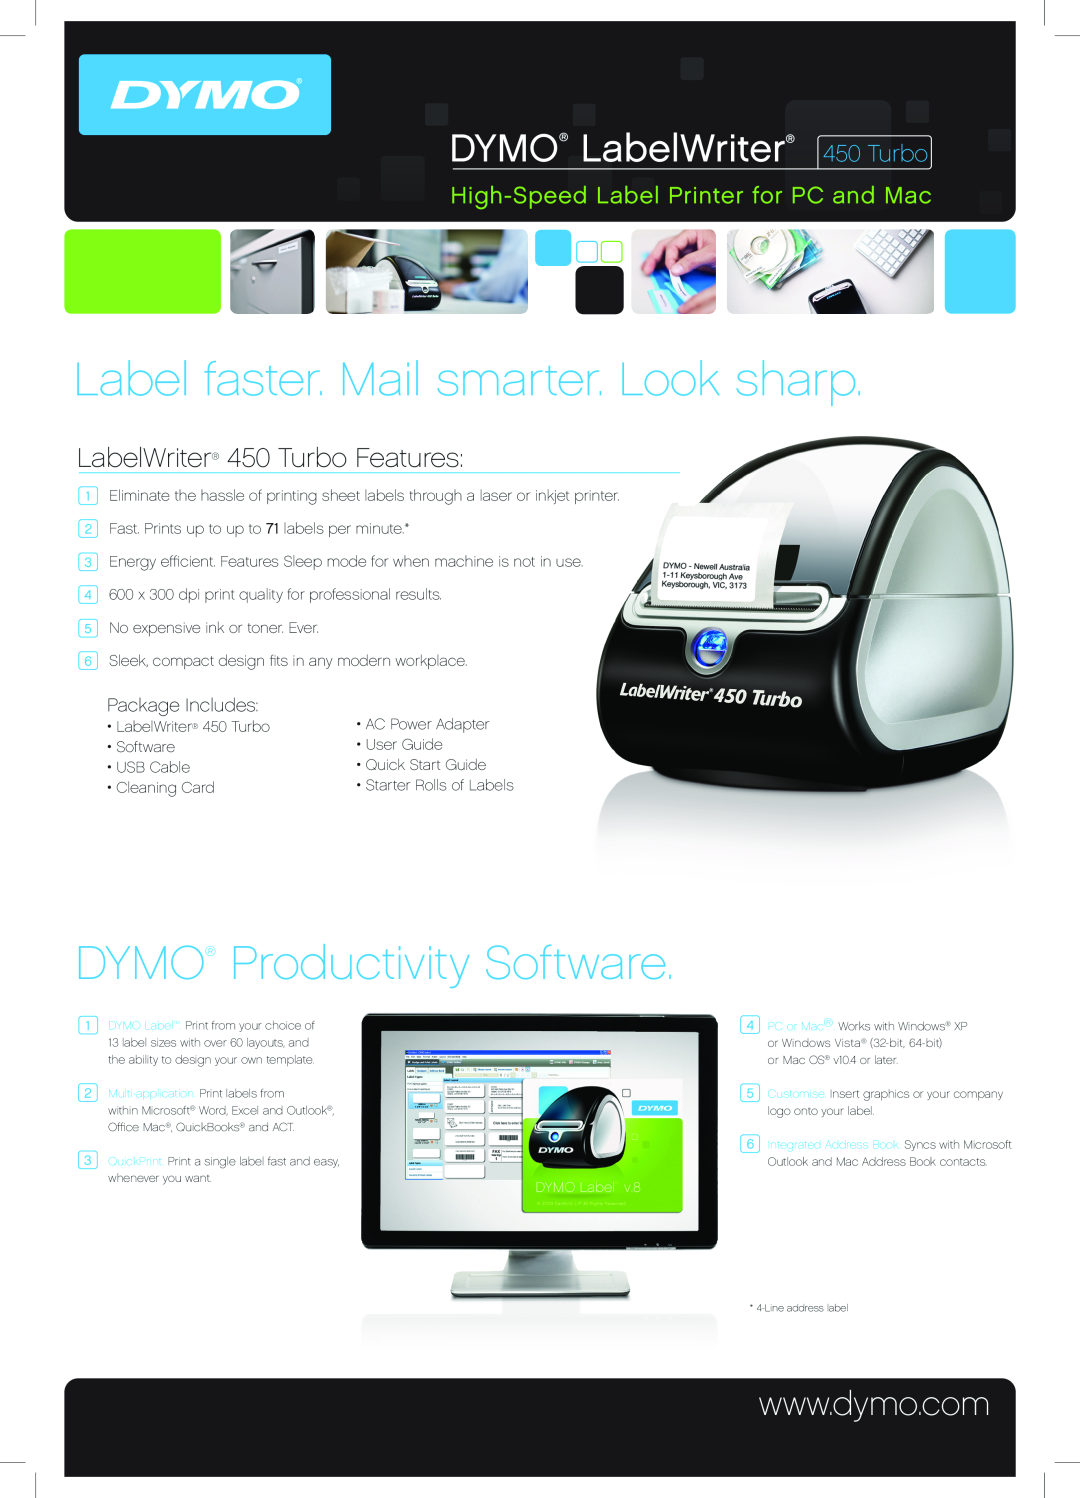 Dymo 450 TURBO quick start Label faster. Mail smarter. Look sharp, DYMO Productivity Software, DYMO LabelWriter 450 Turbo 